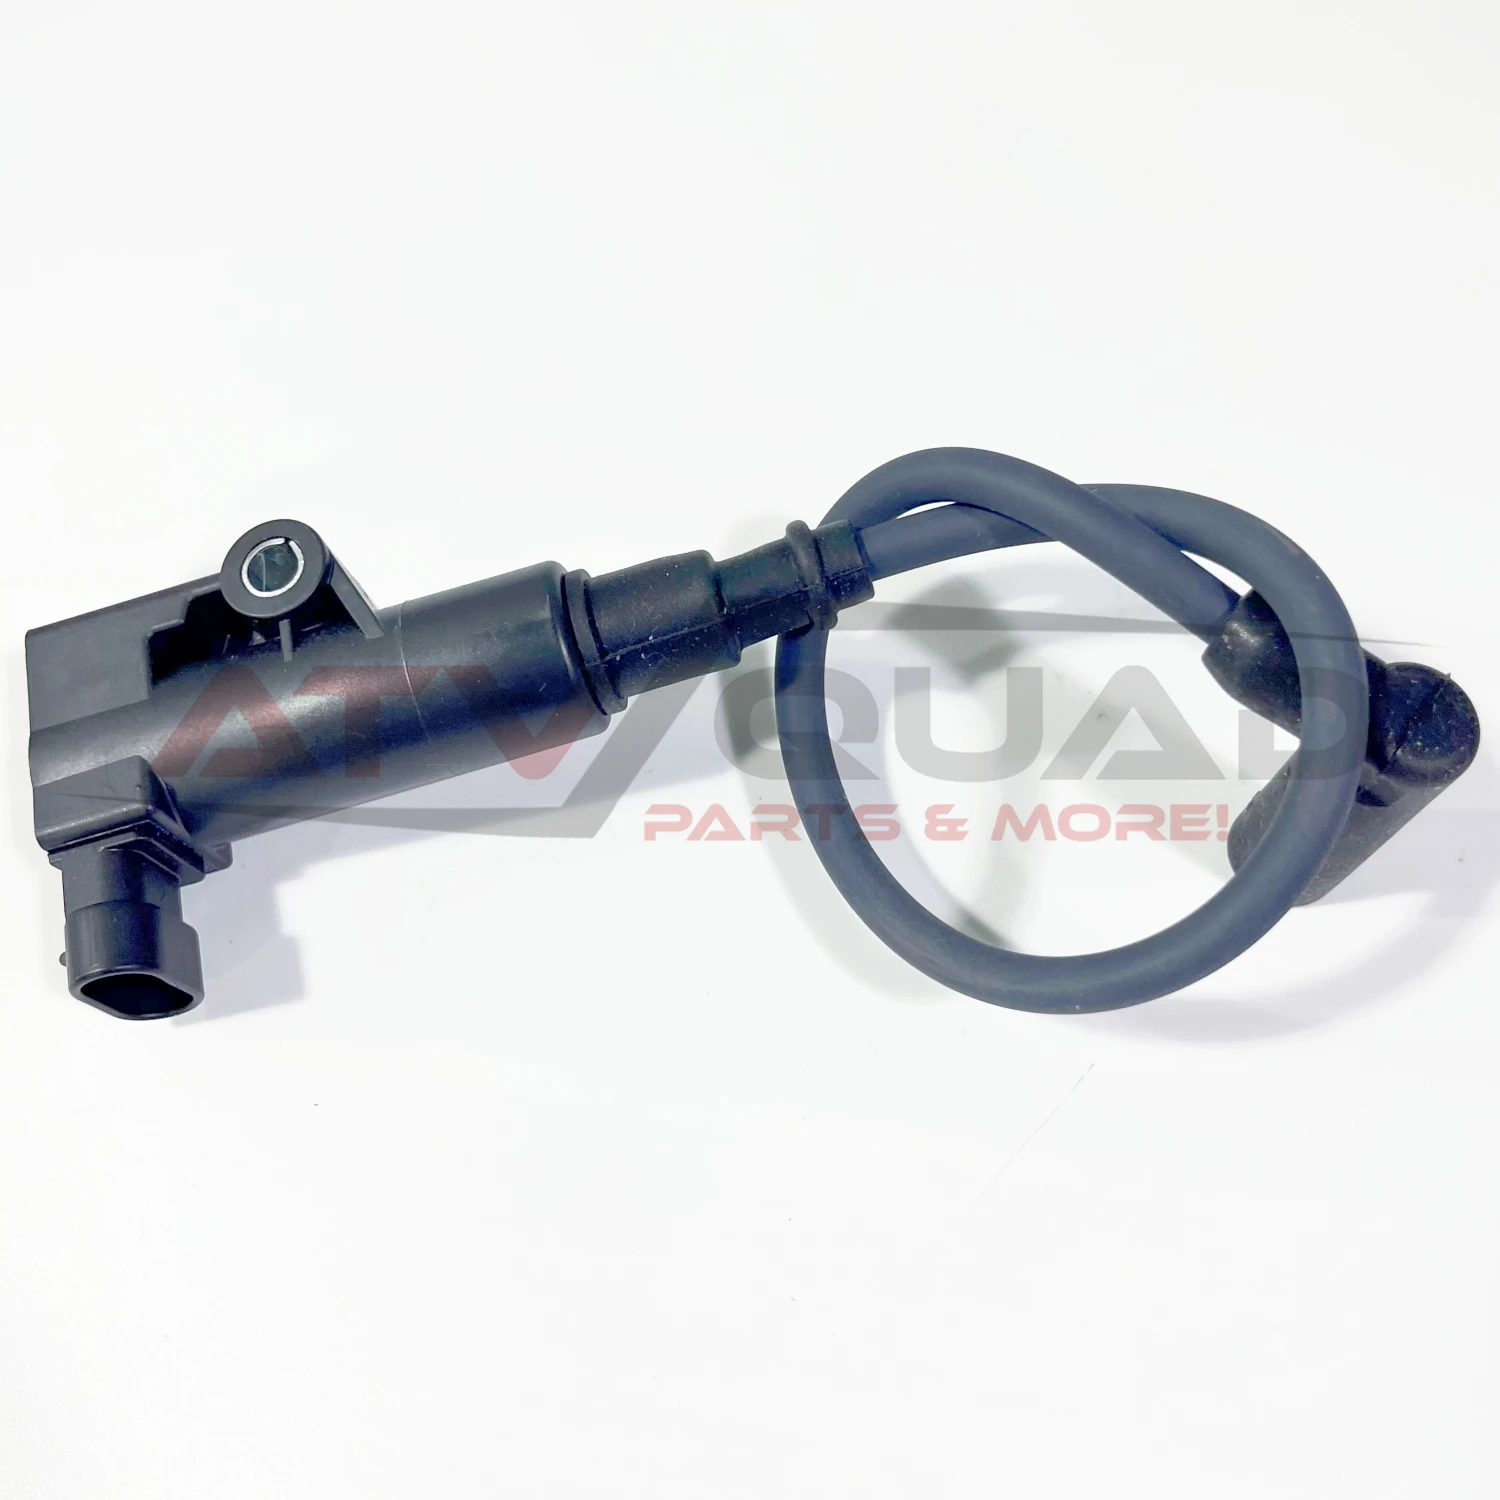 Ignition Coil and Wire for Rural King RK Performance 250 450 550 33100-116-0000 33120-113E-0000 BDW-IN-103 33100